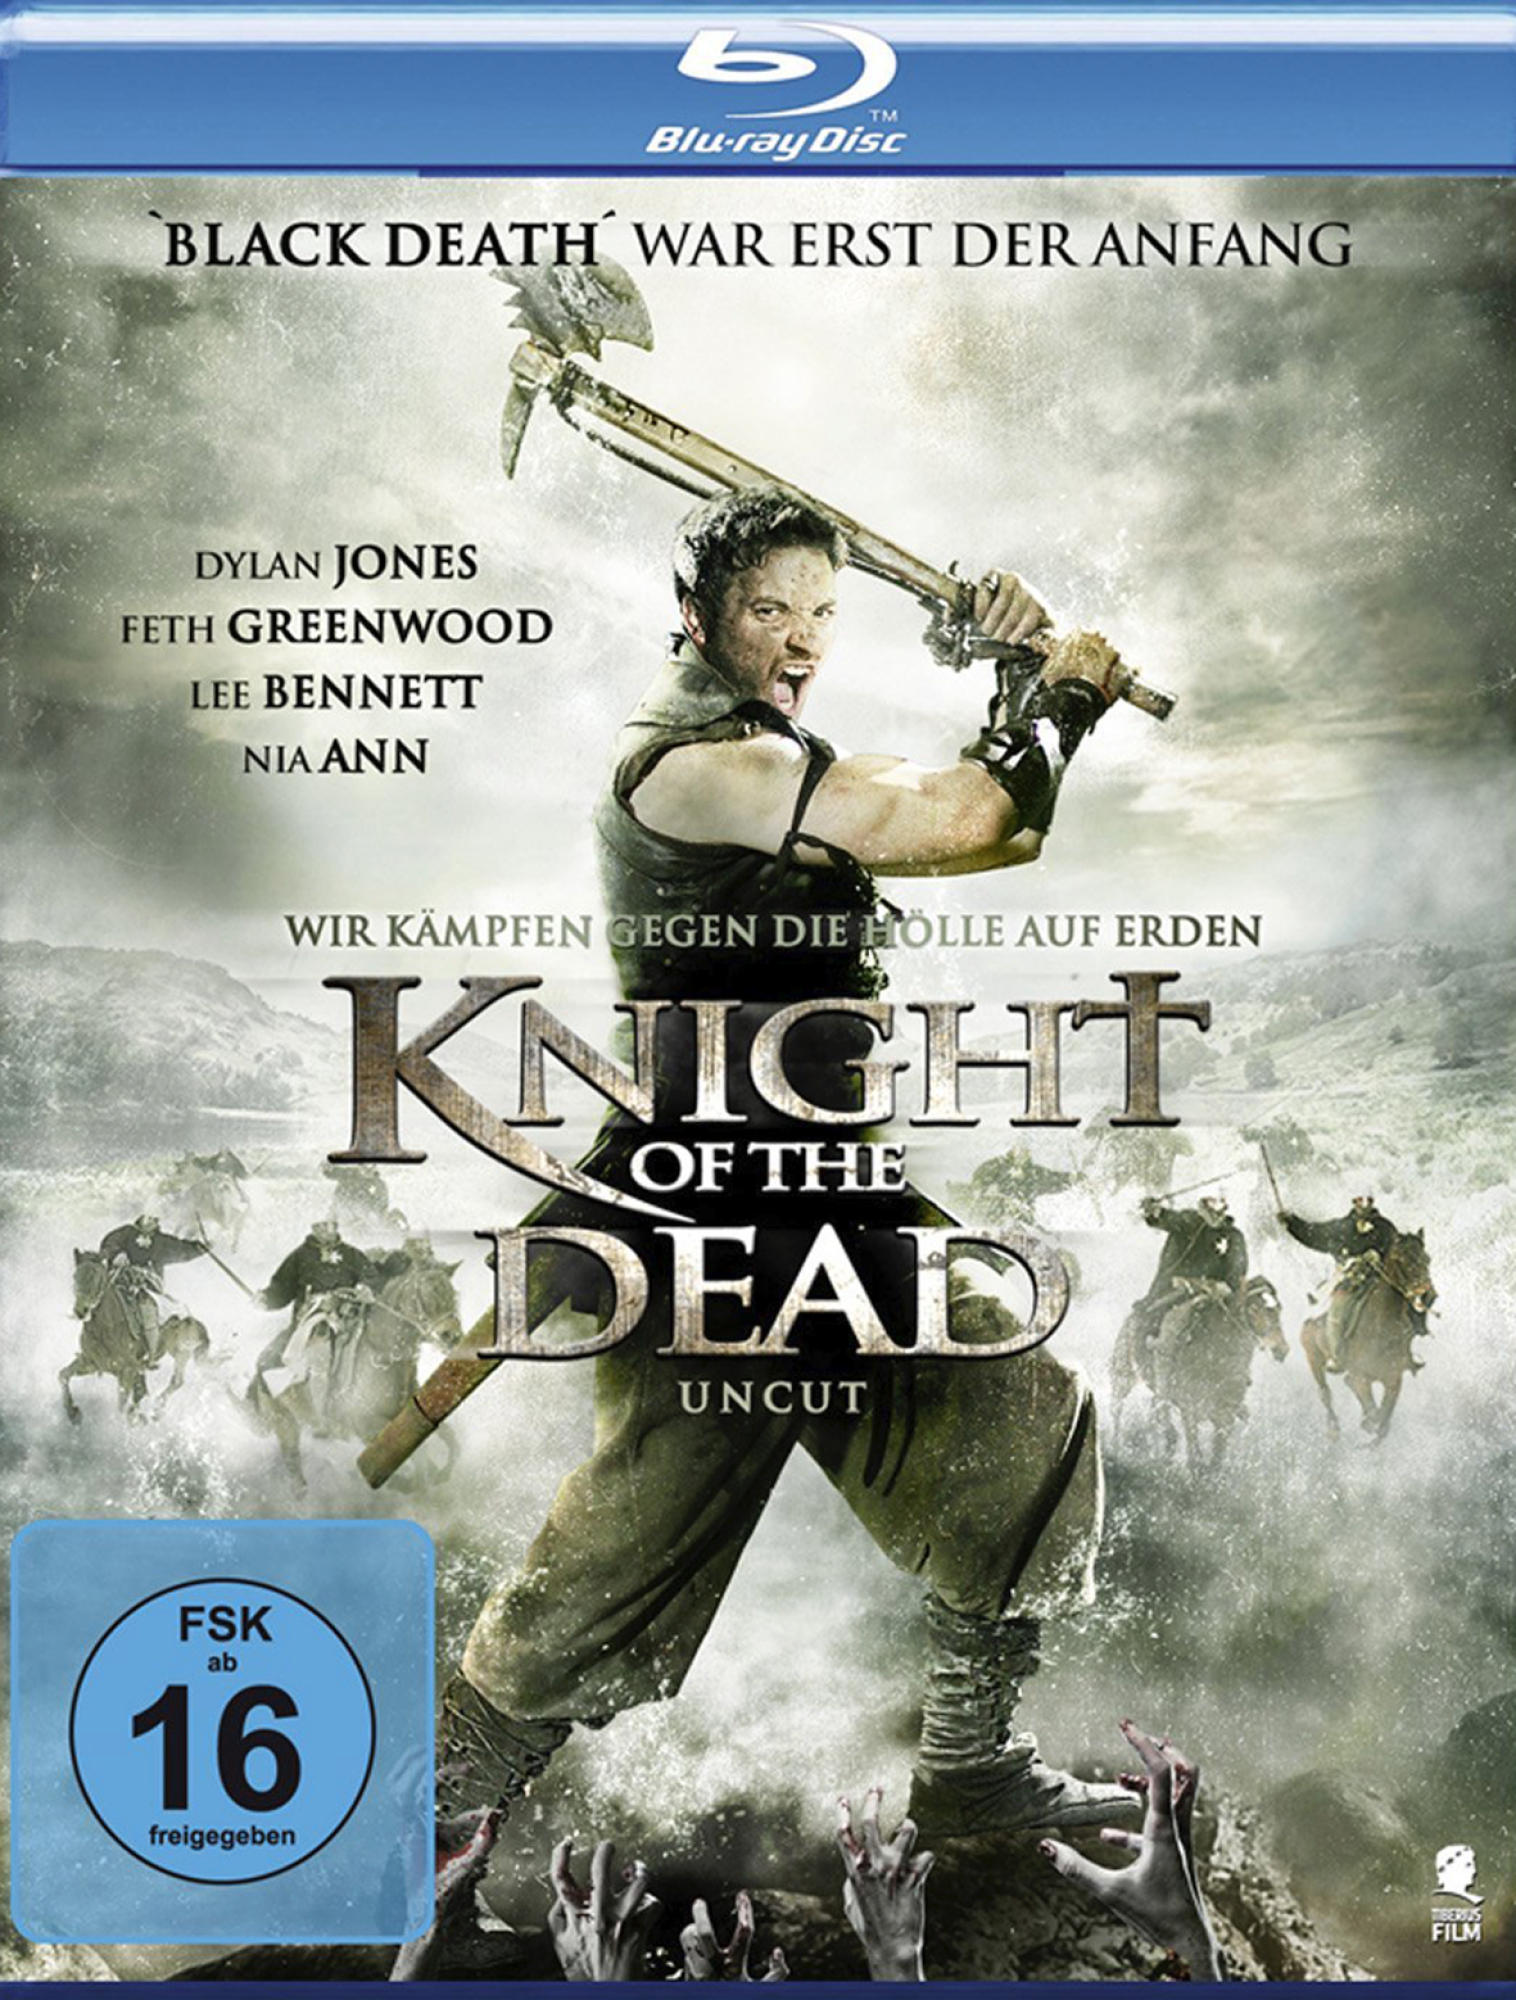 of the Dead Knight Blu-ray